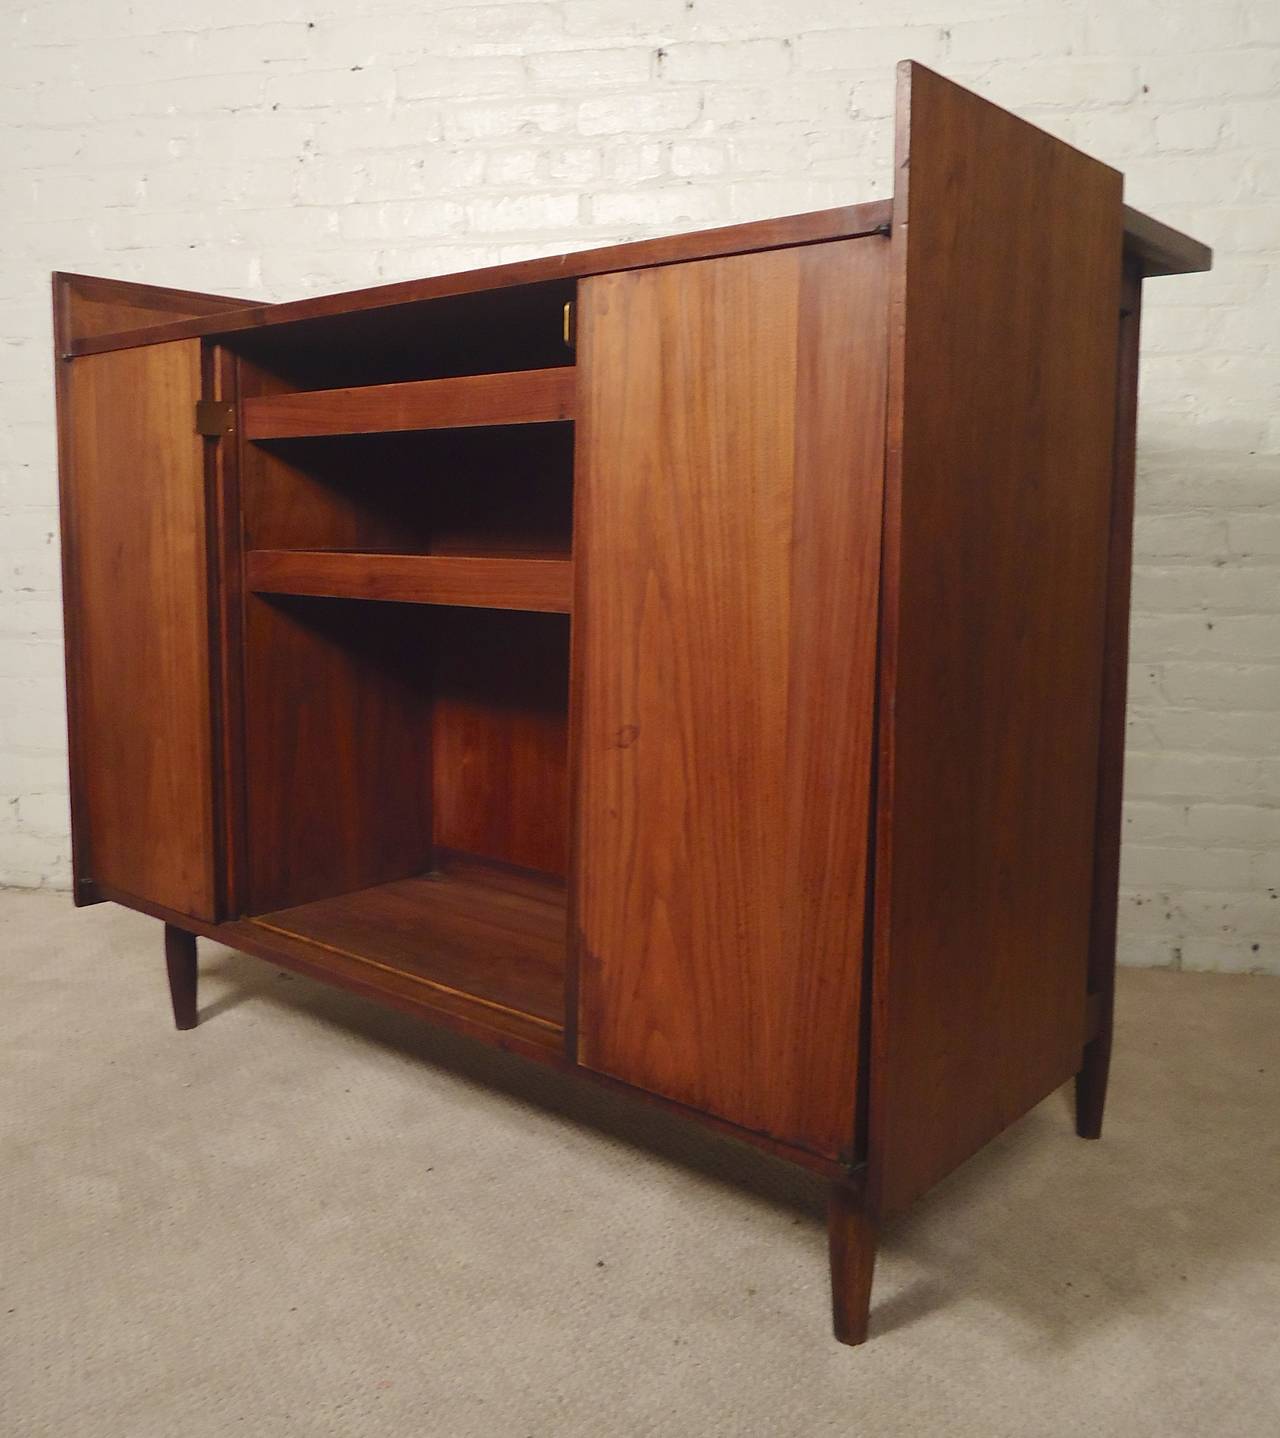 Excellent dry bar with caning detail on the front and back. Ample storage with side doors, middle sliding doors, black work top, sculpted bar surface. Attractive walnut grain throughout. Lots of function!

(Please confirm item location - NY or NJ